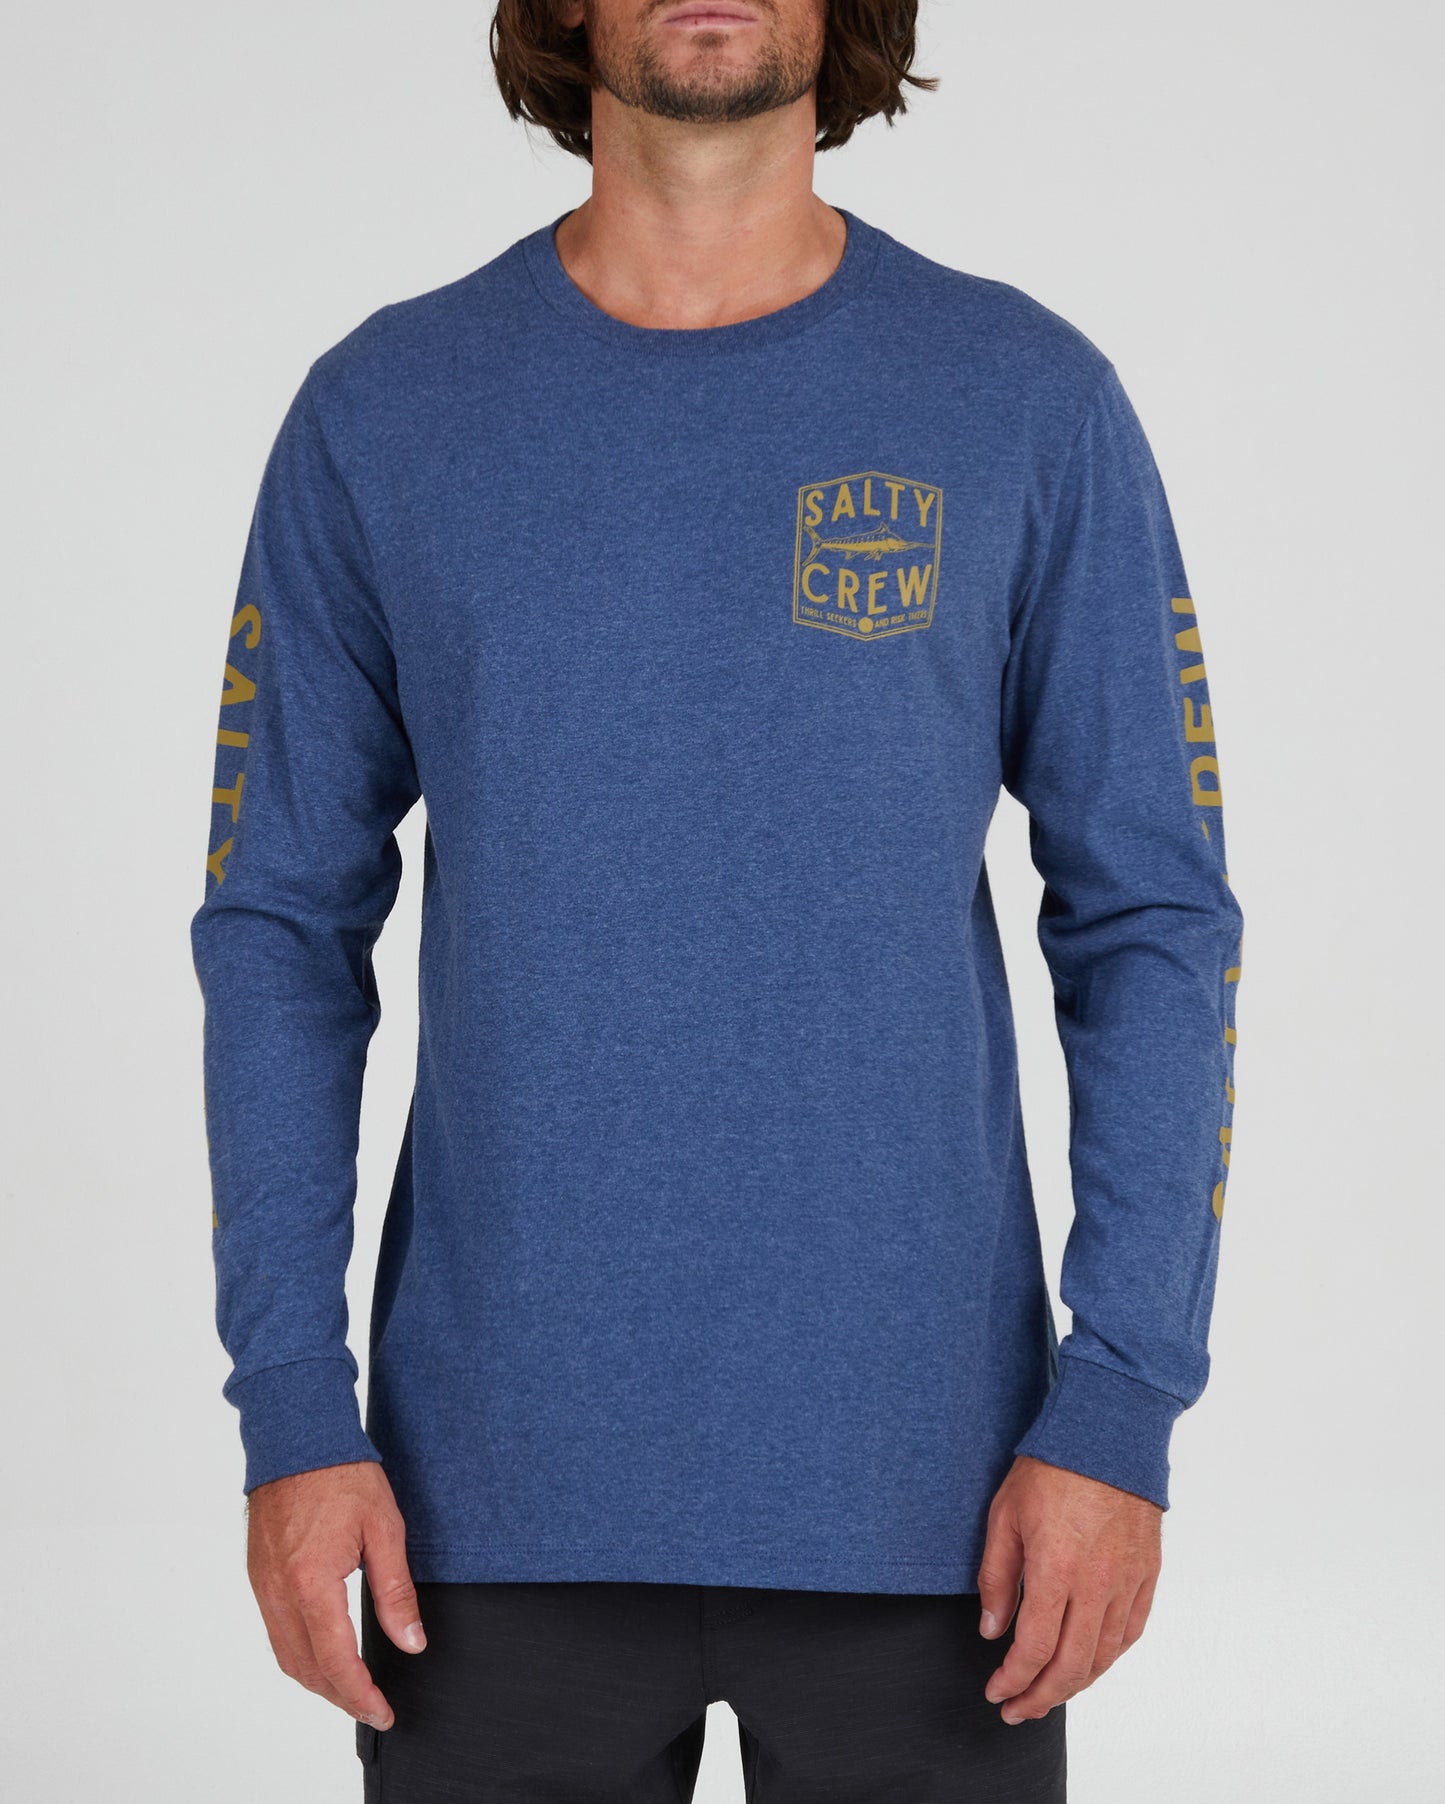 On body front of the Fishery Navy Heather L/S Standard Tee